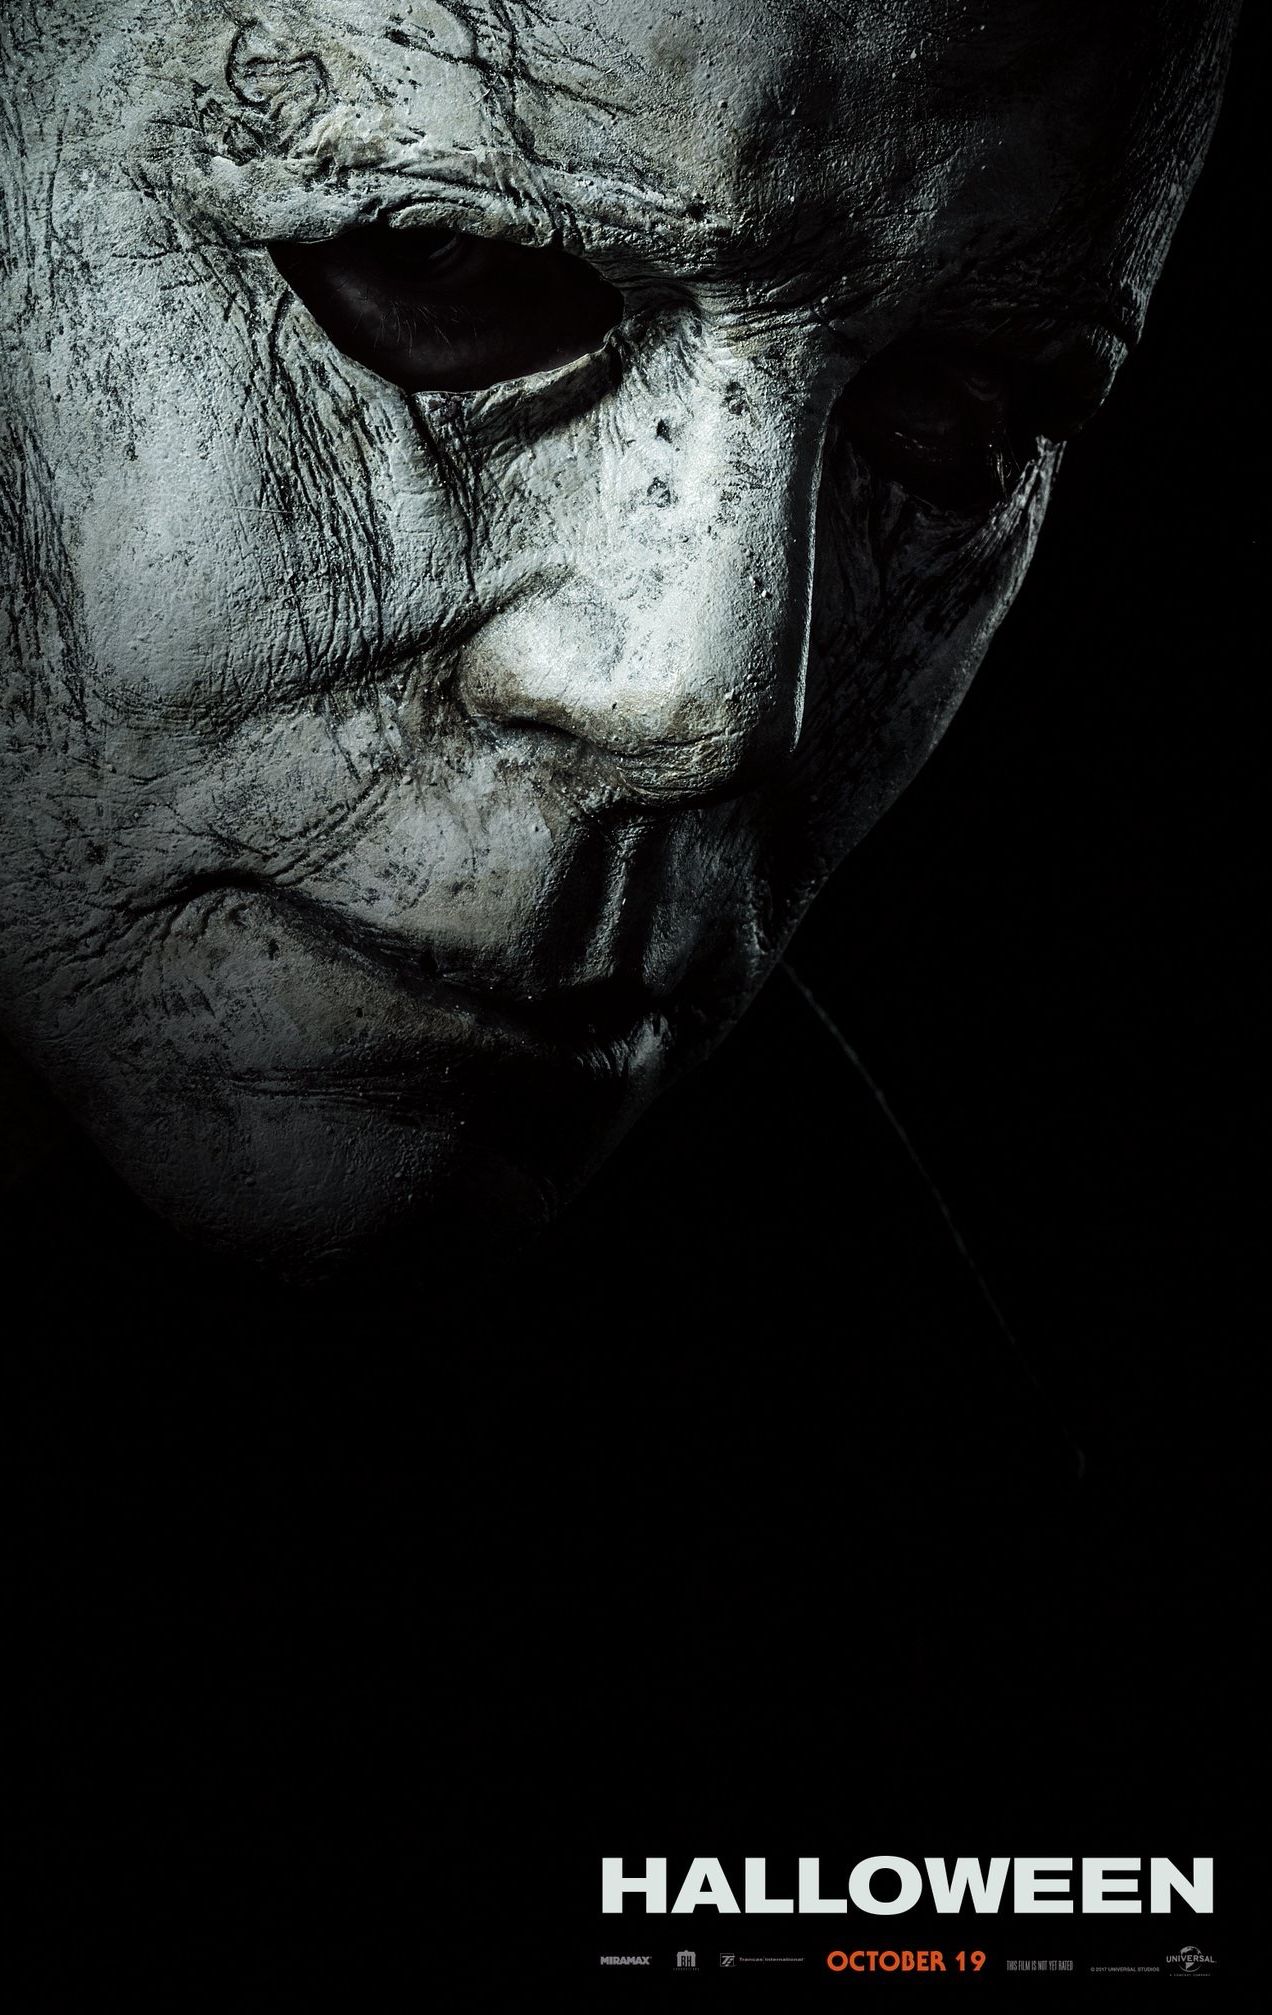 Halloween Official Poster - Blumhouse Productions